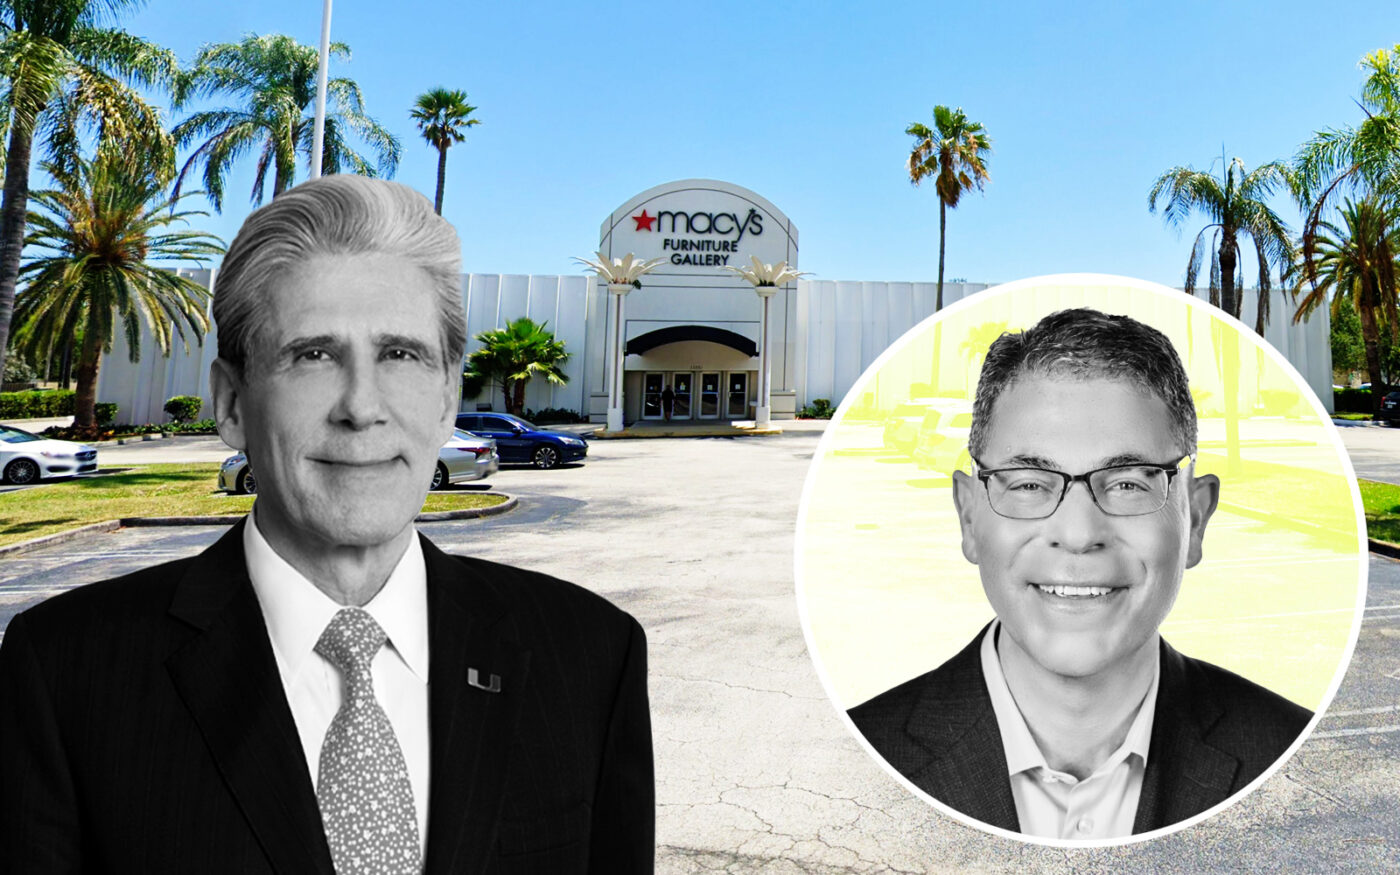 University of Miami Pays $40M for Pinecrest Macy’s Building